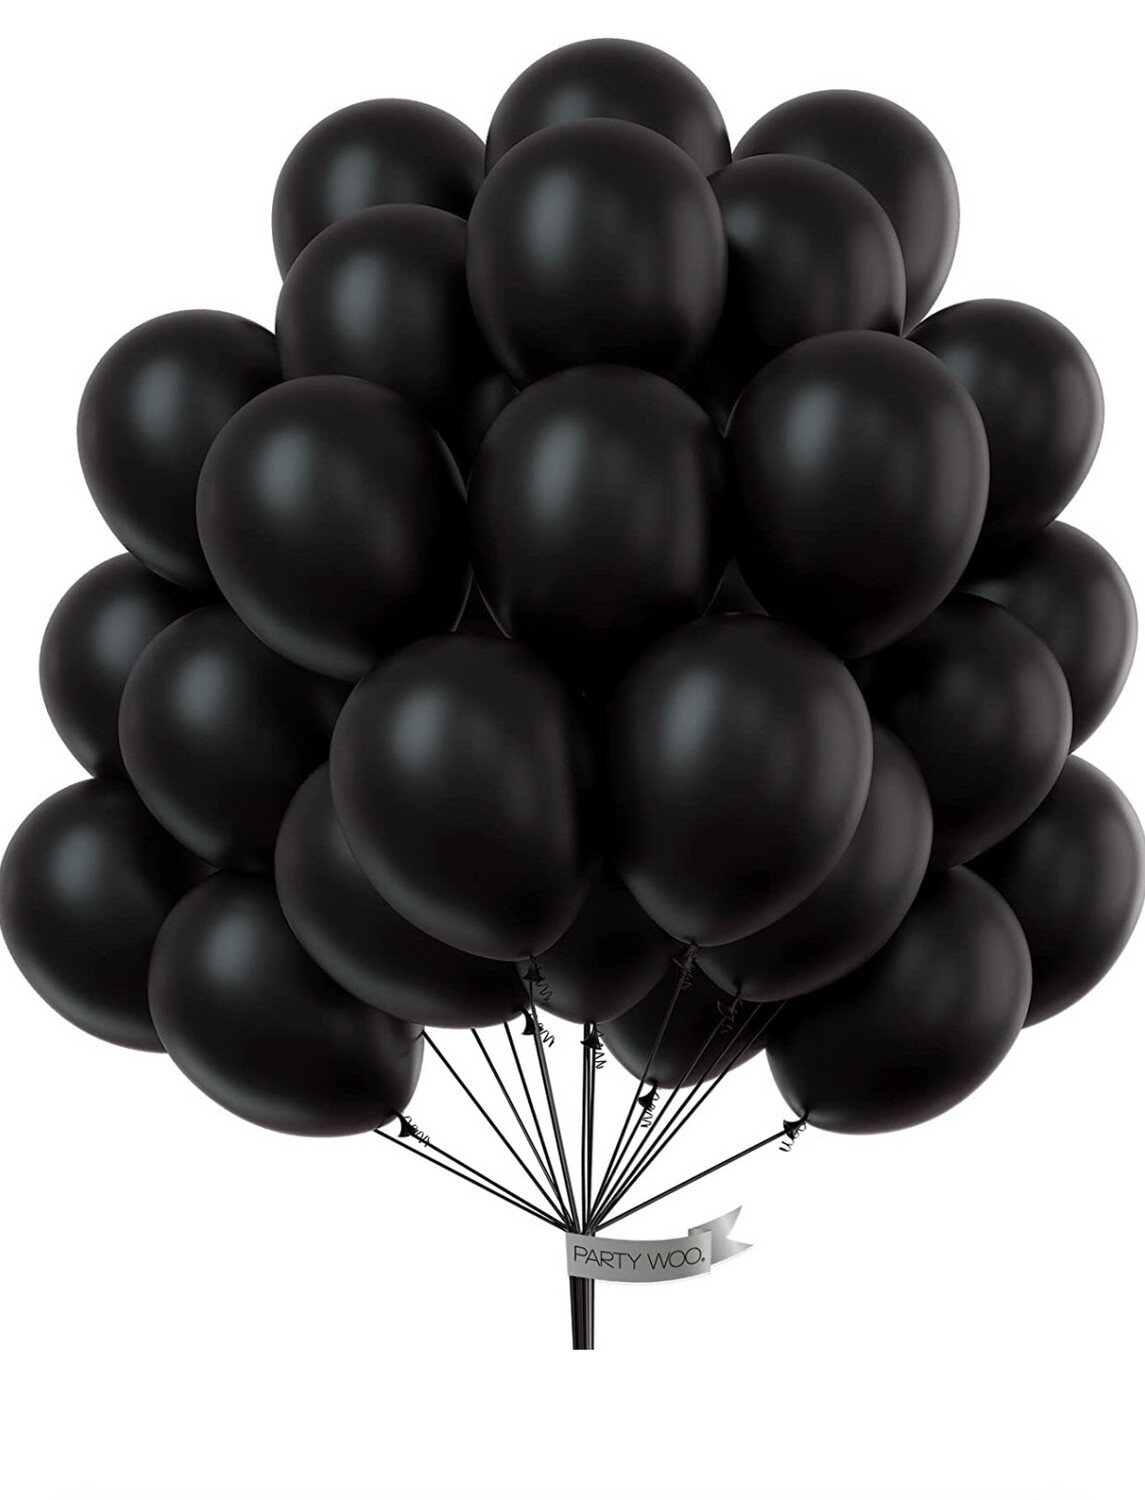 Balloons 50pcs pack BlackLatex Balloons for Valentine ,Wedding Graduation Baby Shower Birthday Party Decorations